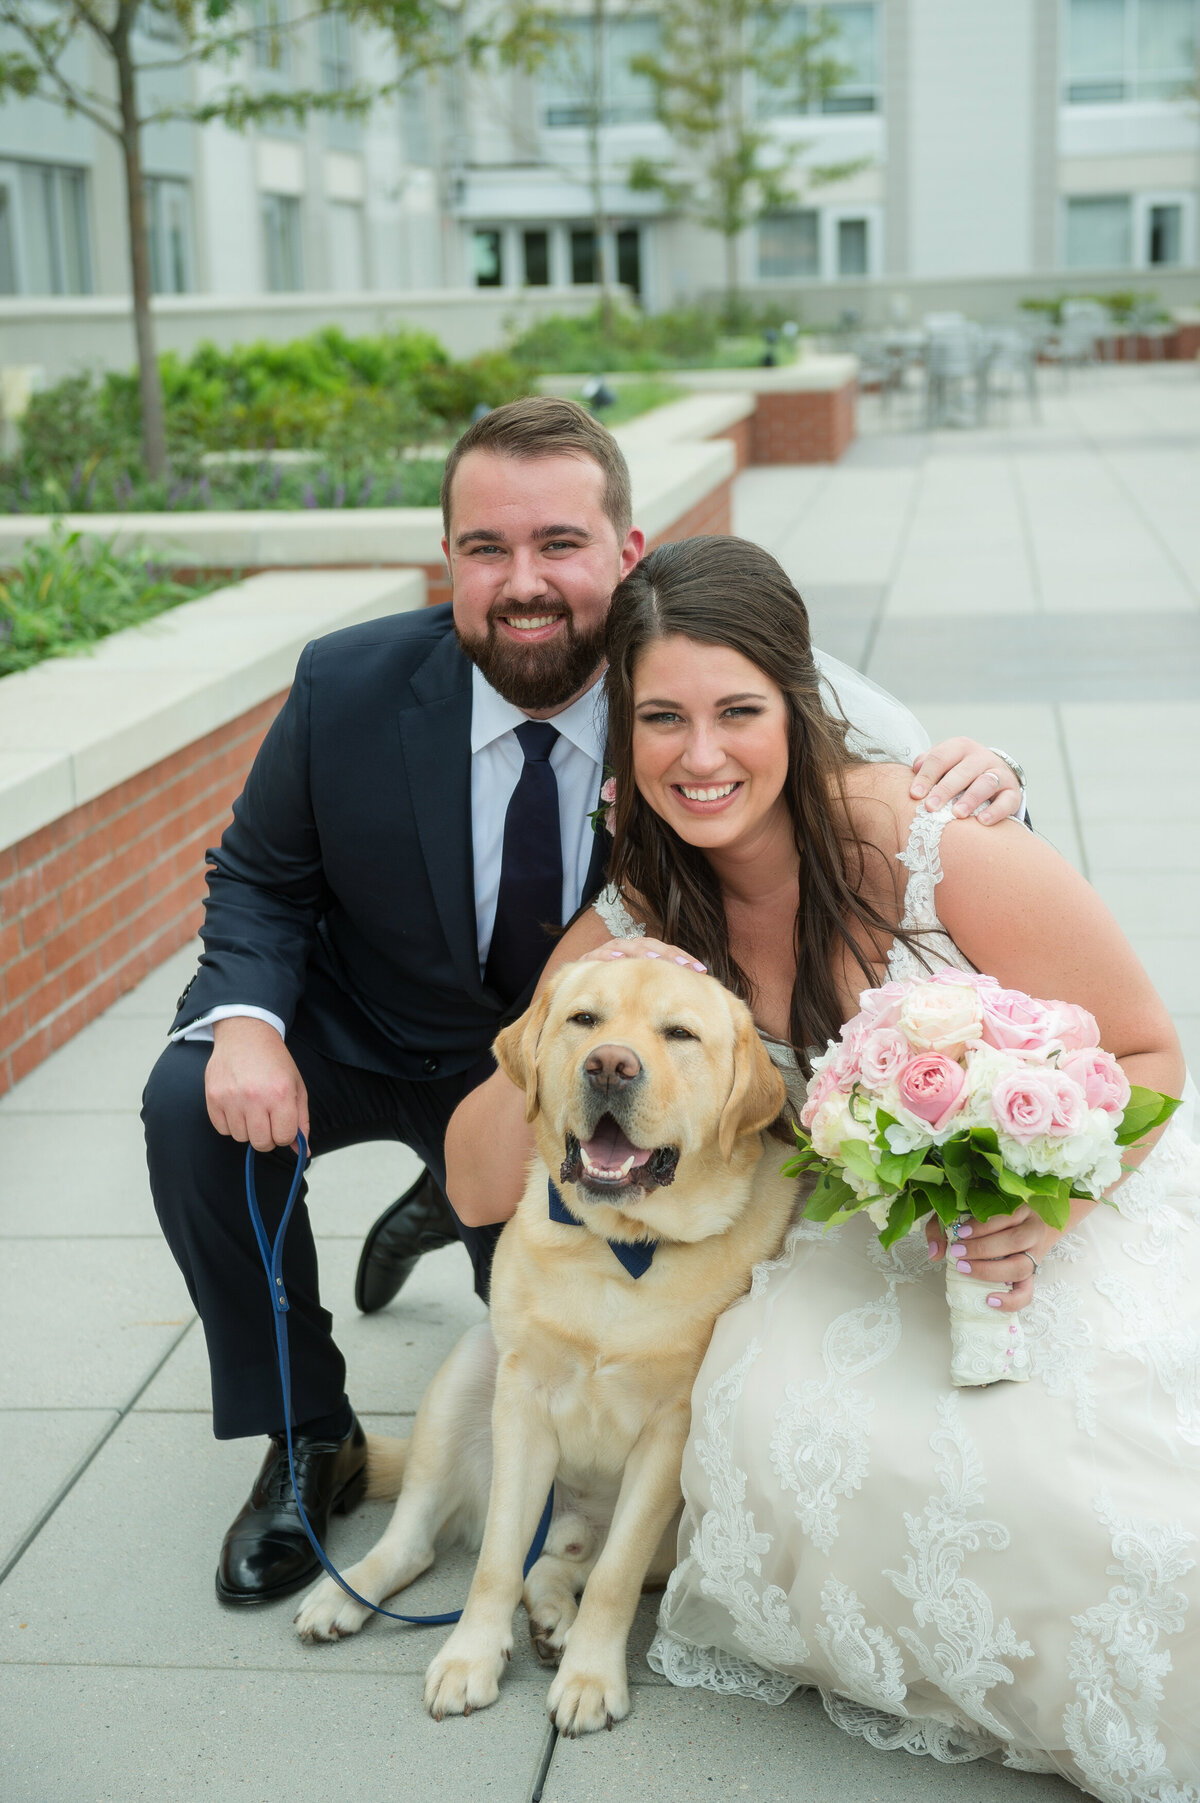 Bride and groom with a golden retriever wearing a bowtie.